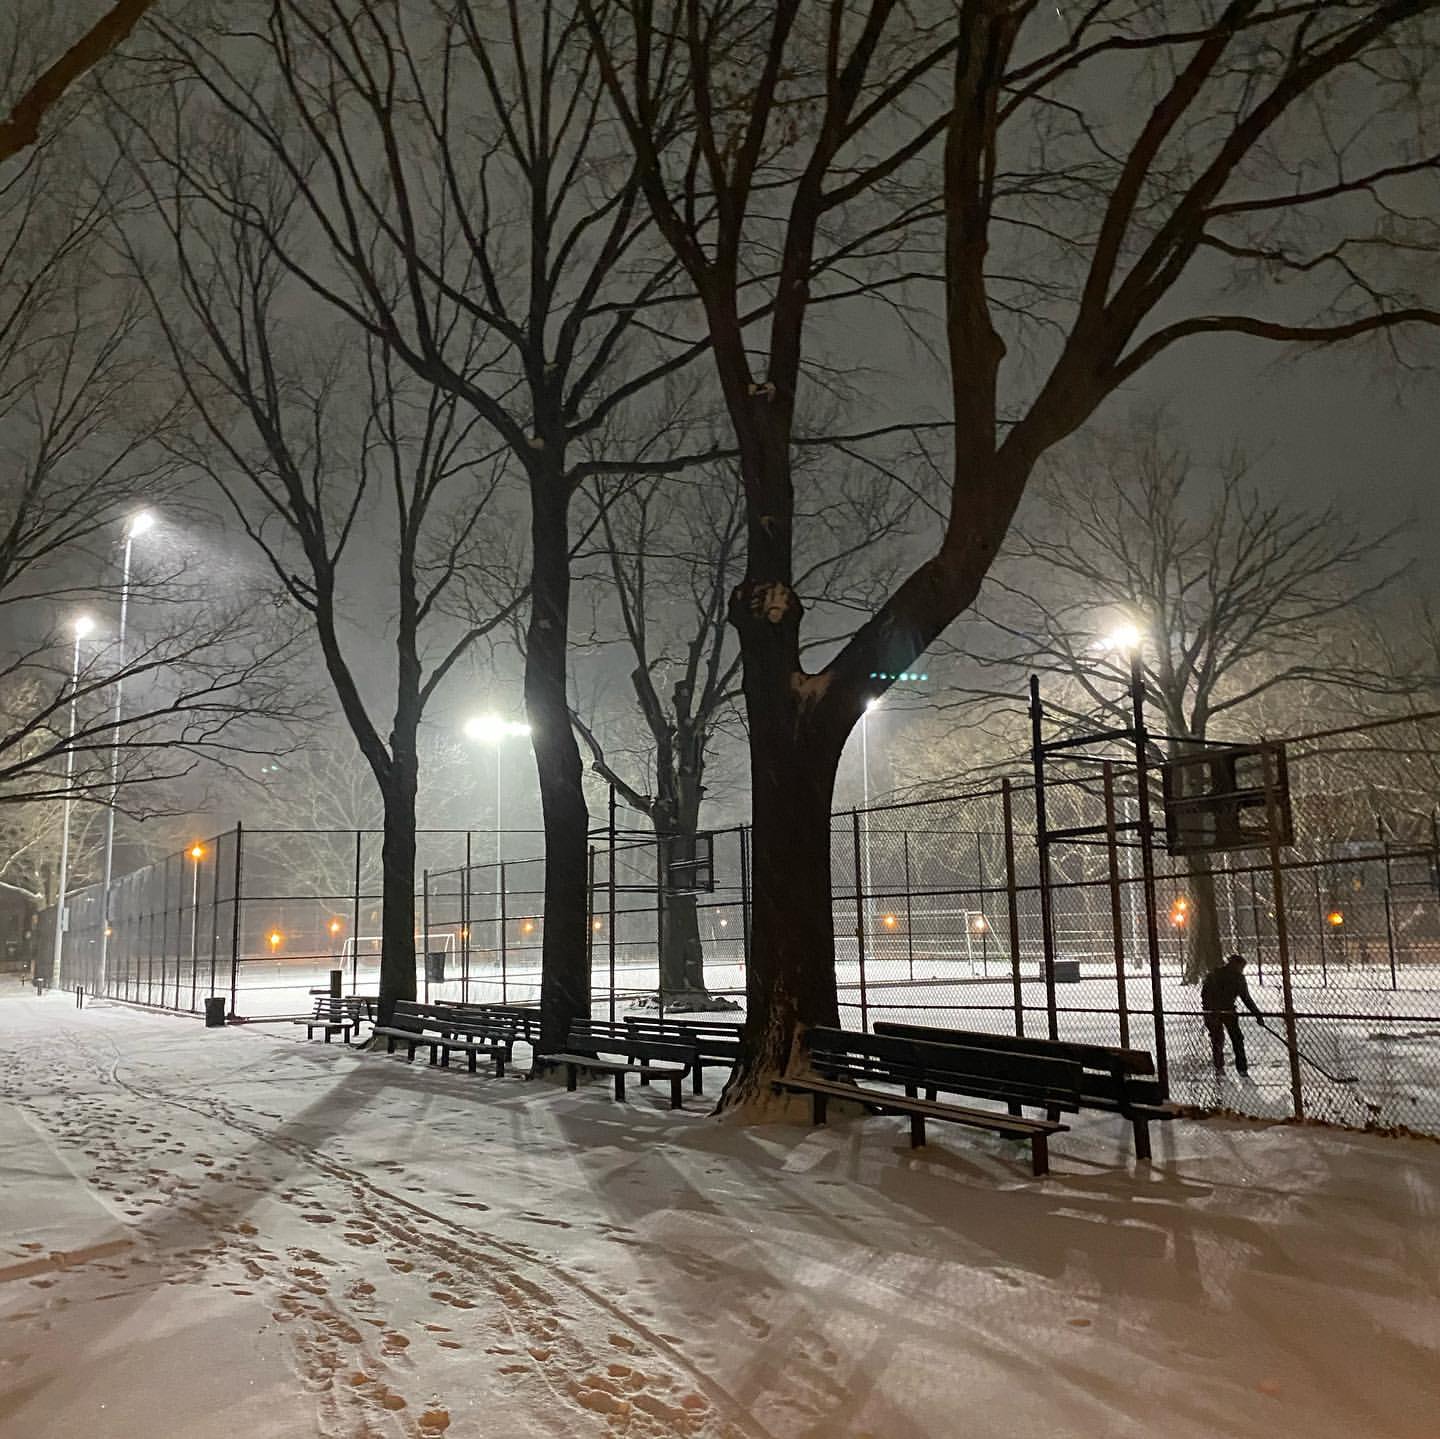 A snowy park at night with bare trees and footprints on the ground. lit streetlamps illuminate a fenced basketball court where a solitary figure can be seen.